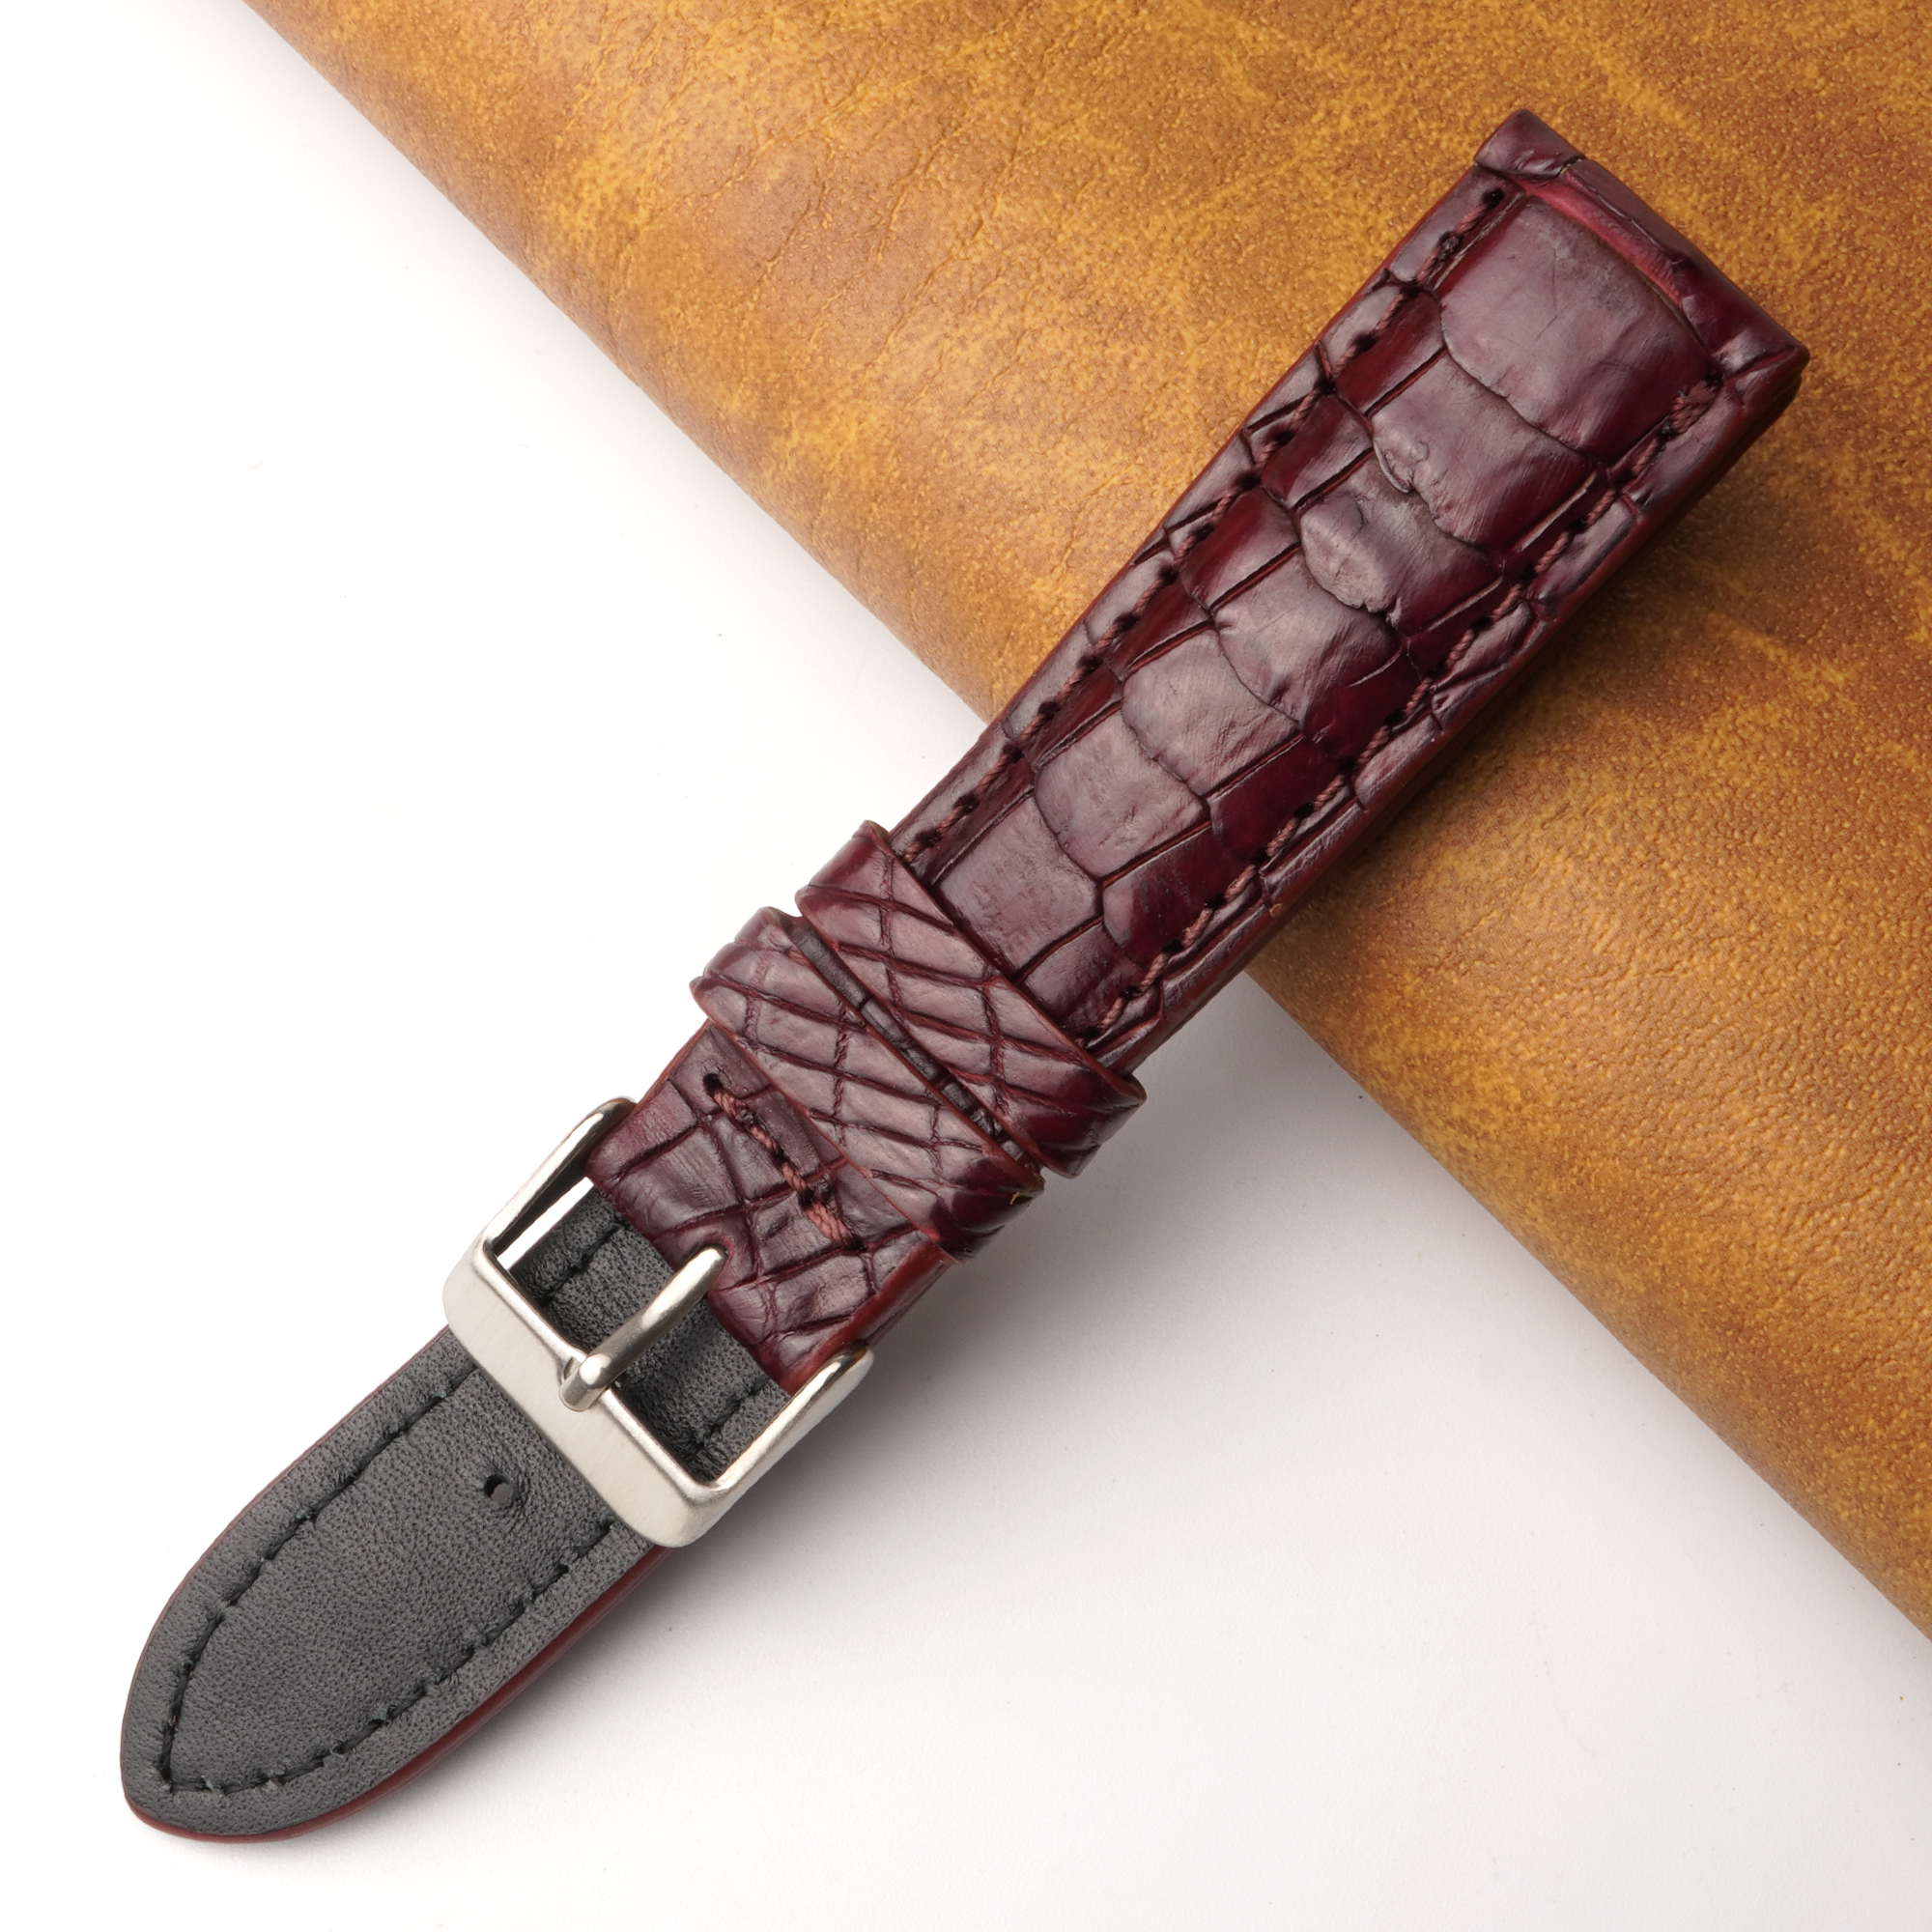 20mm Burgundy Unique Pattern Alligator Leather Watch Band For Men DH-223I